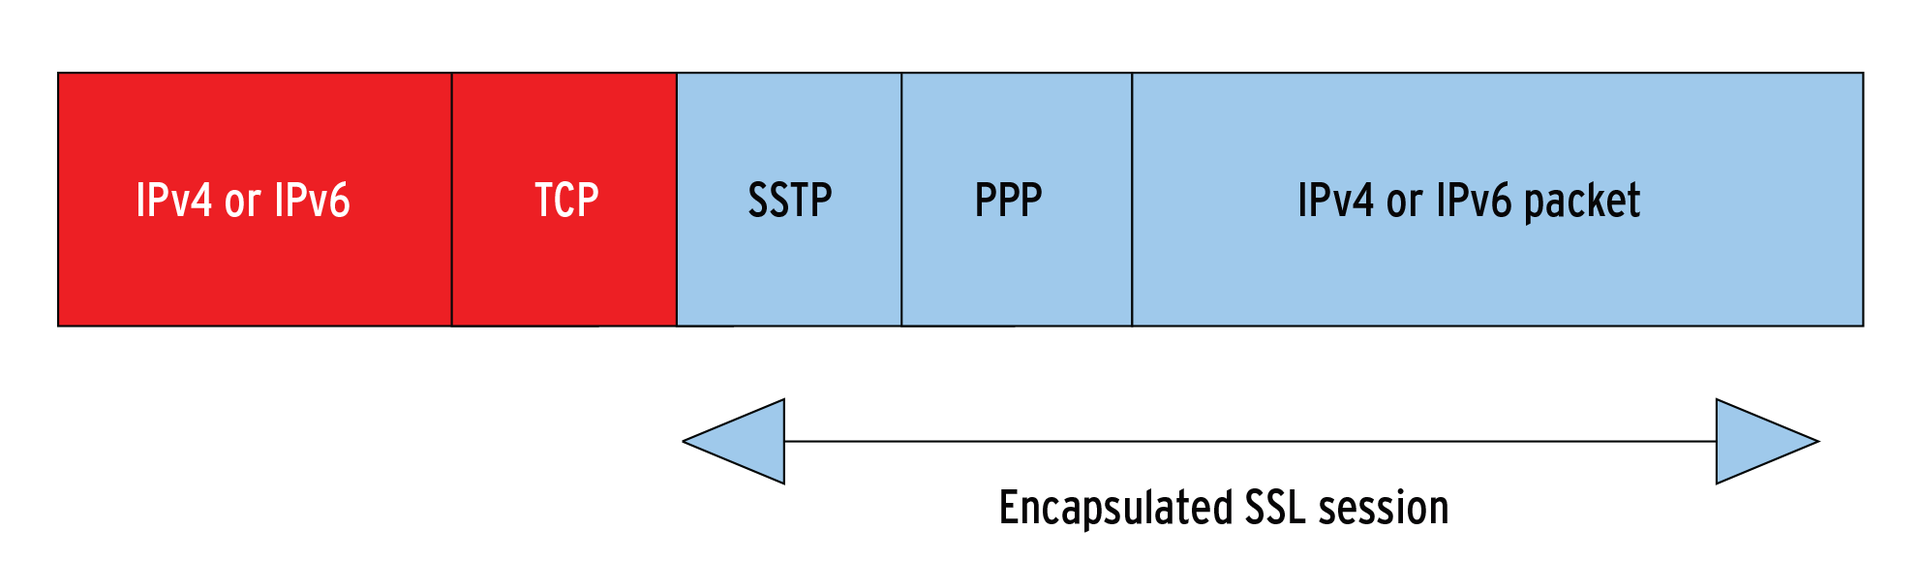 The SSTP encapsulation structure is like a Russian doll. Microsoft has gone to considerable trouble to make something proprietary from what are basically open protocols. From a technical point of view, there seems to be no real reason to use PPP. 